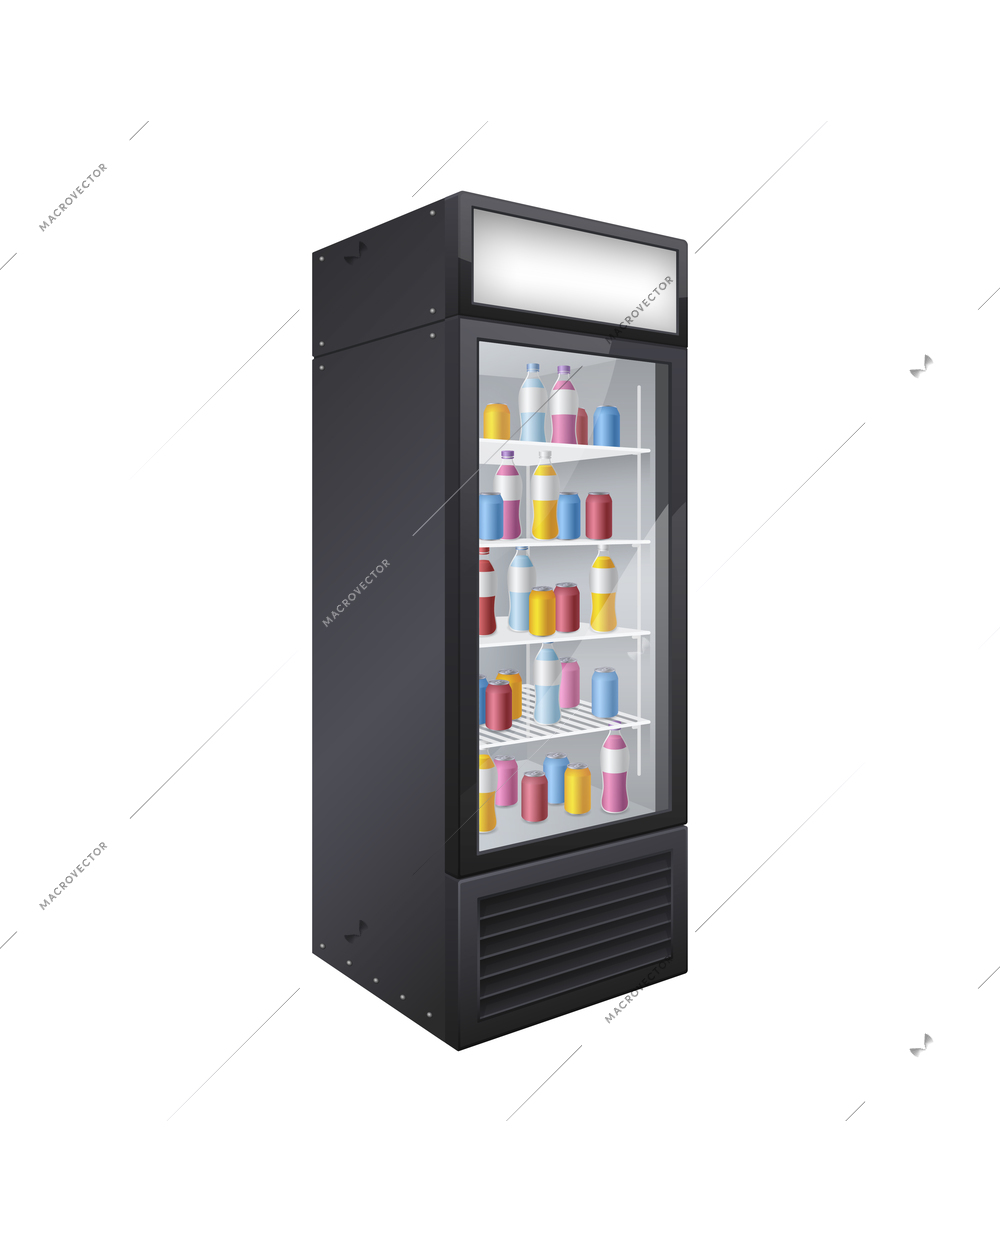 Commercial glass door drink fridge realistic composition with isolated image of single door shop fridge with drinks vector illustration